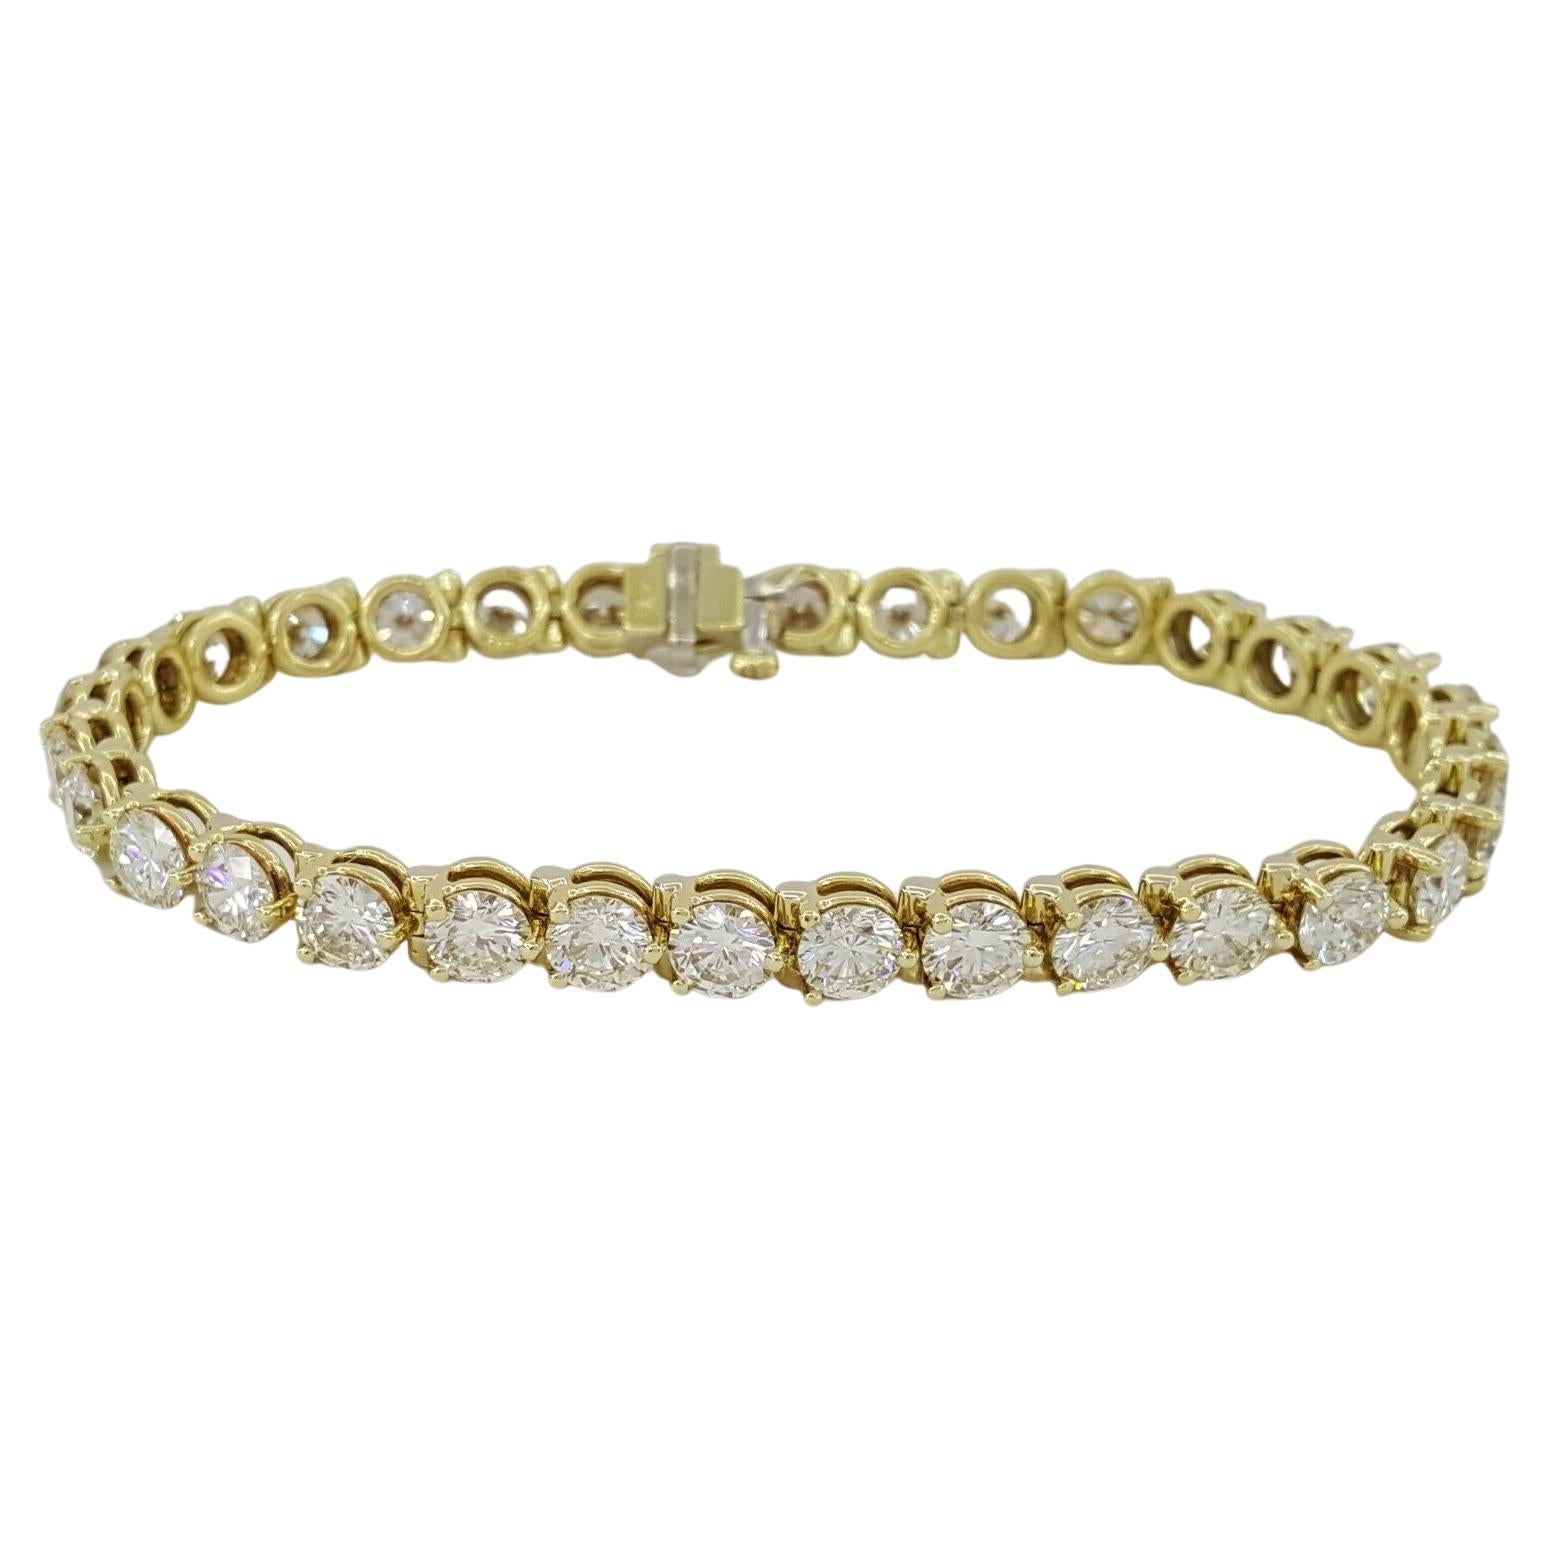 Round Cut 13 ct total weight Round Brilliant Cut Diamond 18K Yellow Gold Tennis Bracelet For Sale